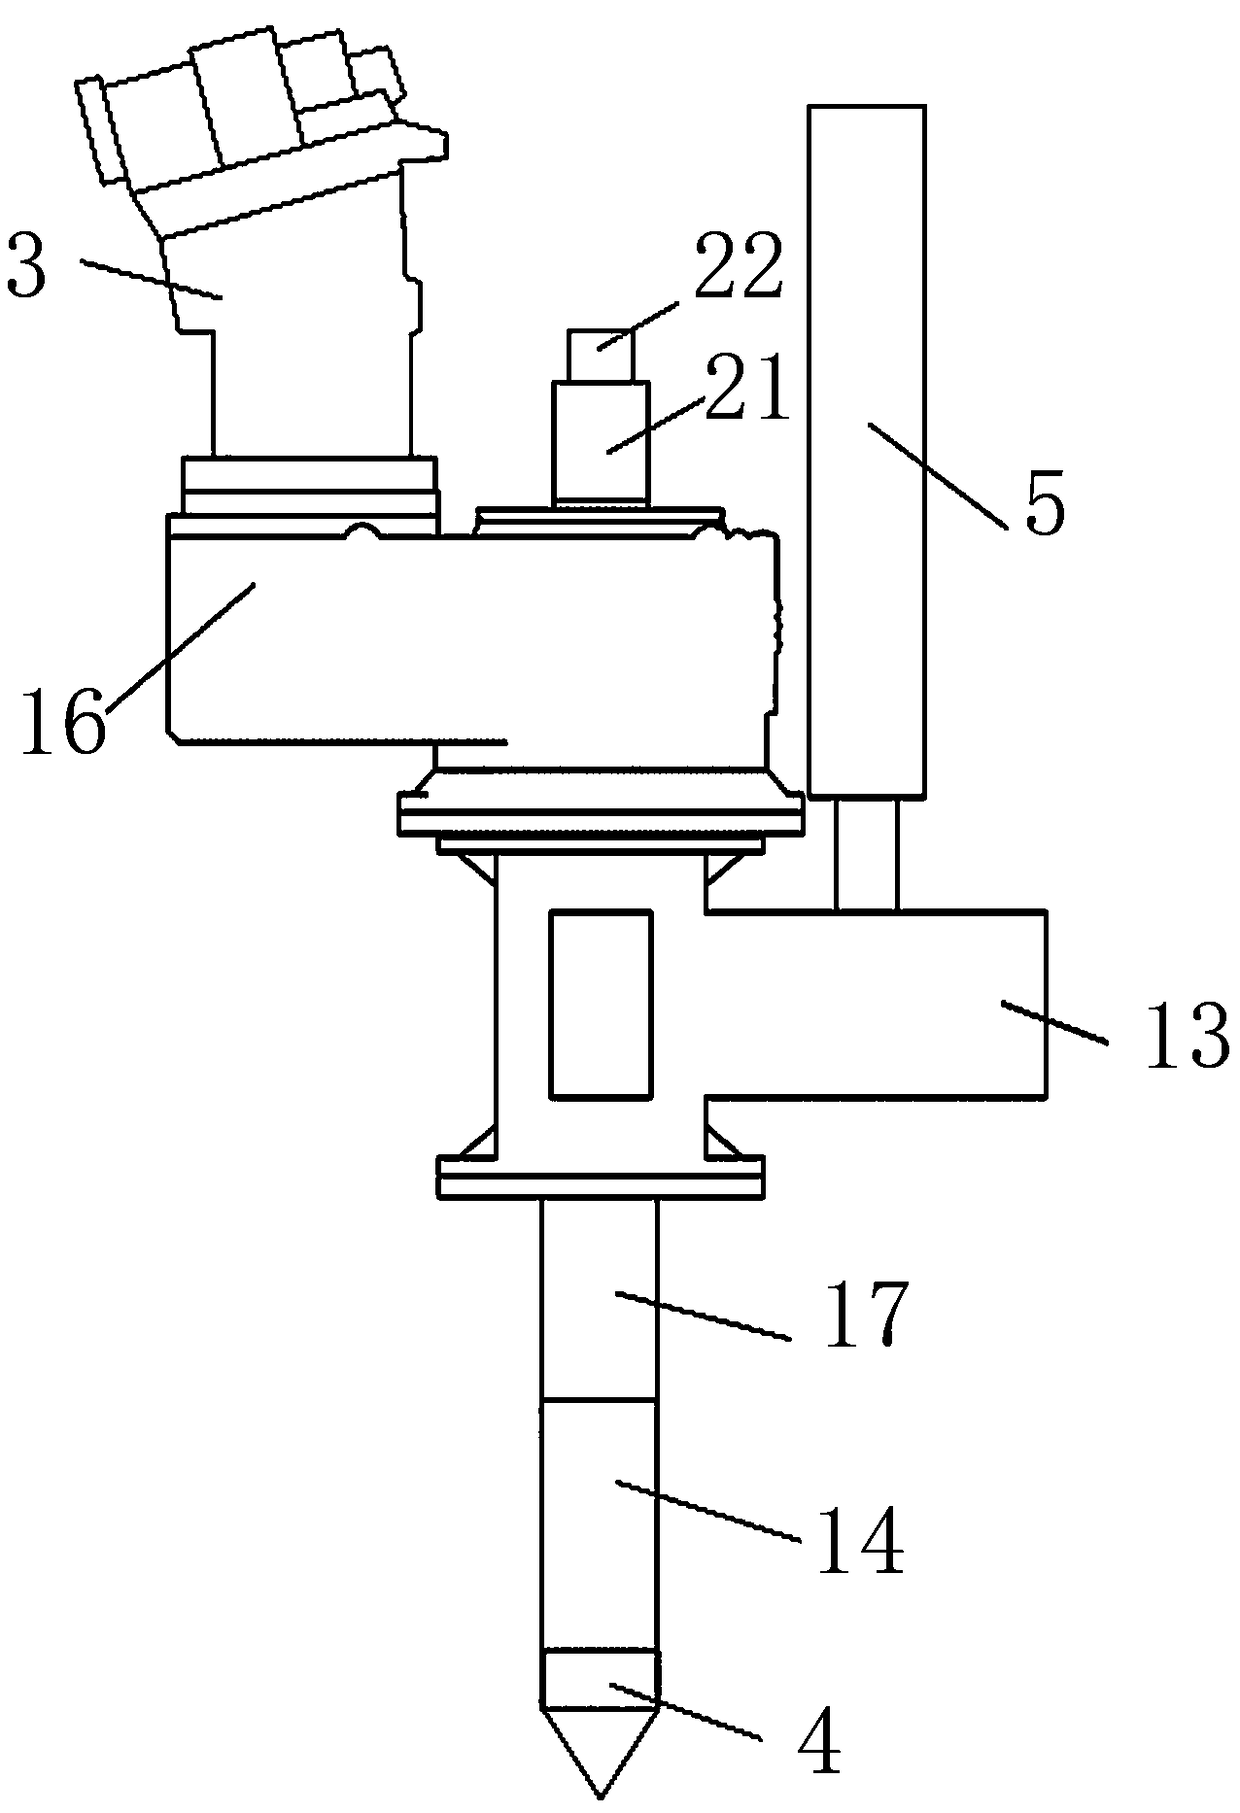 Fully automatic hydraulic rock opening device